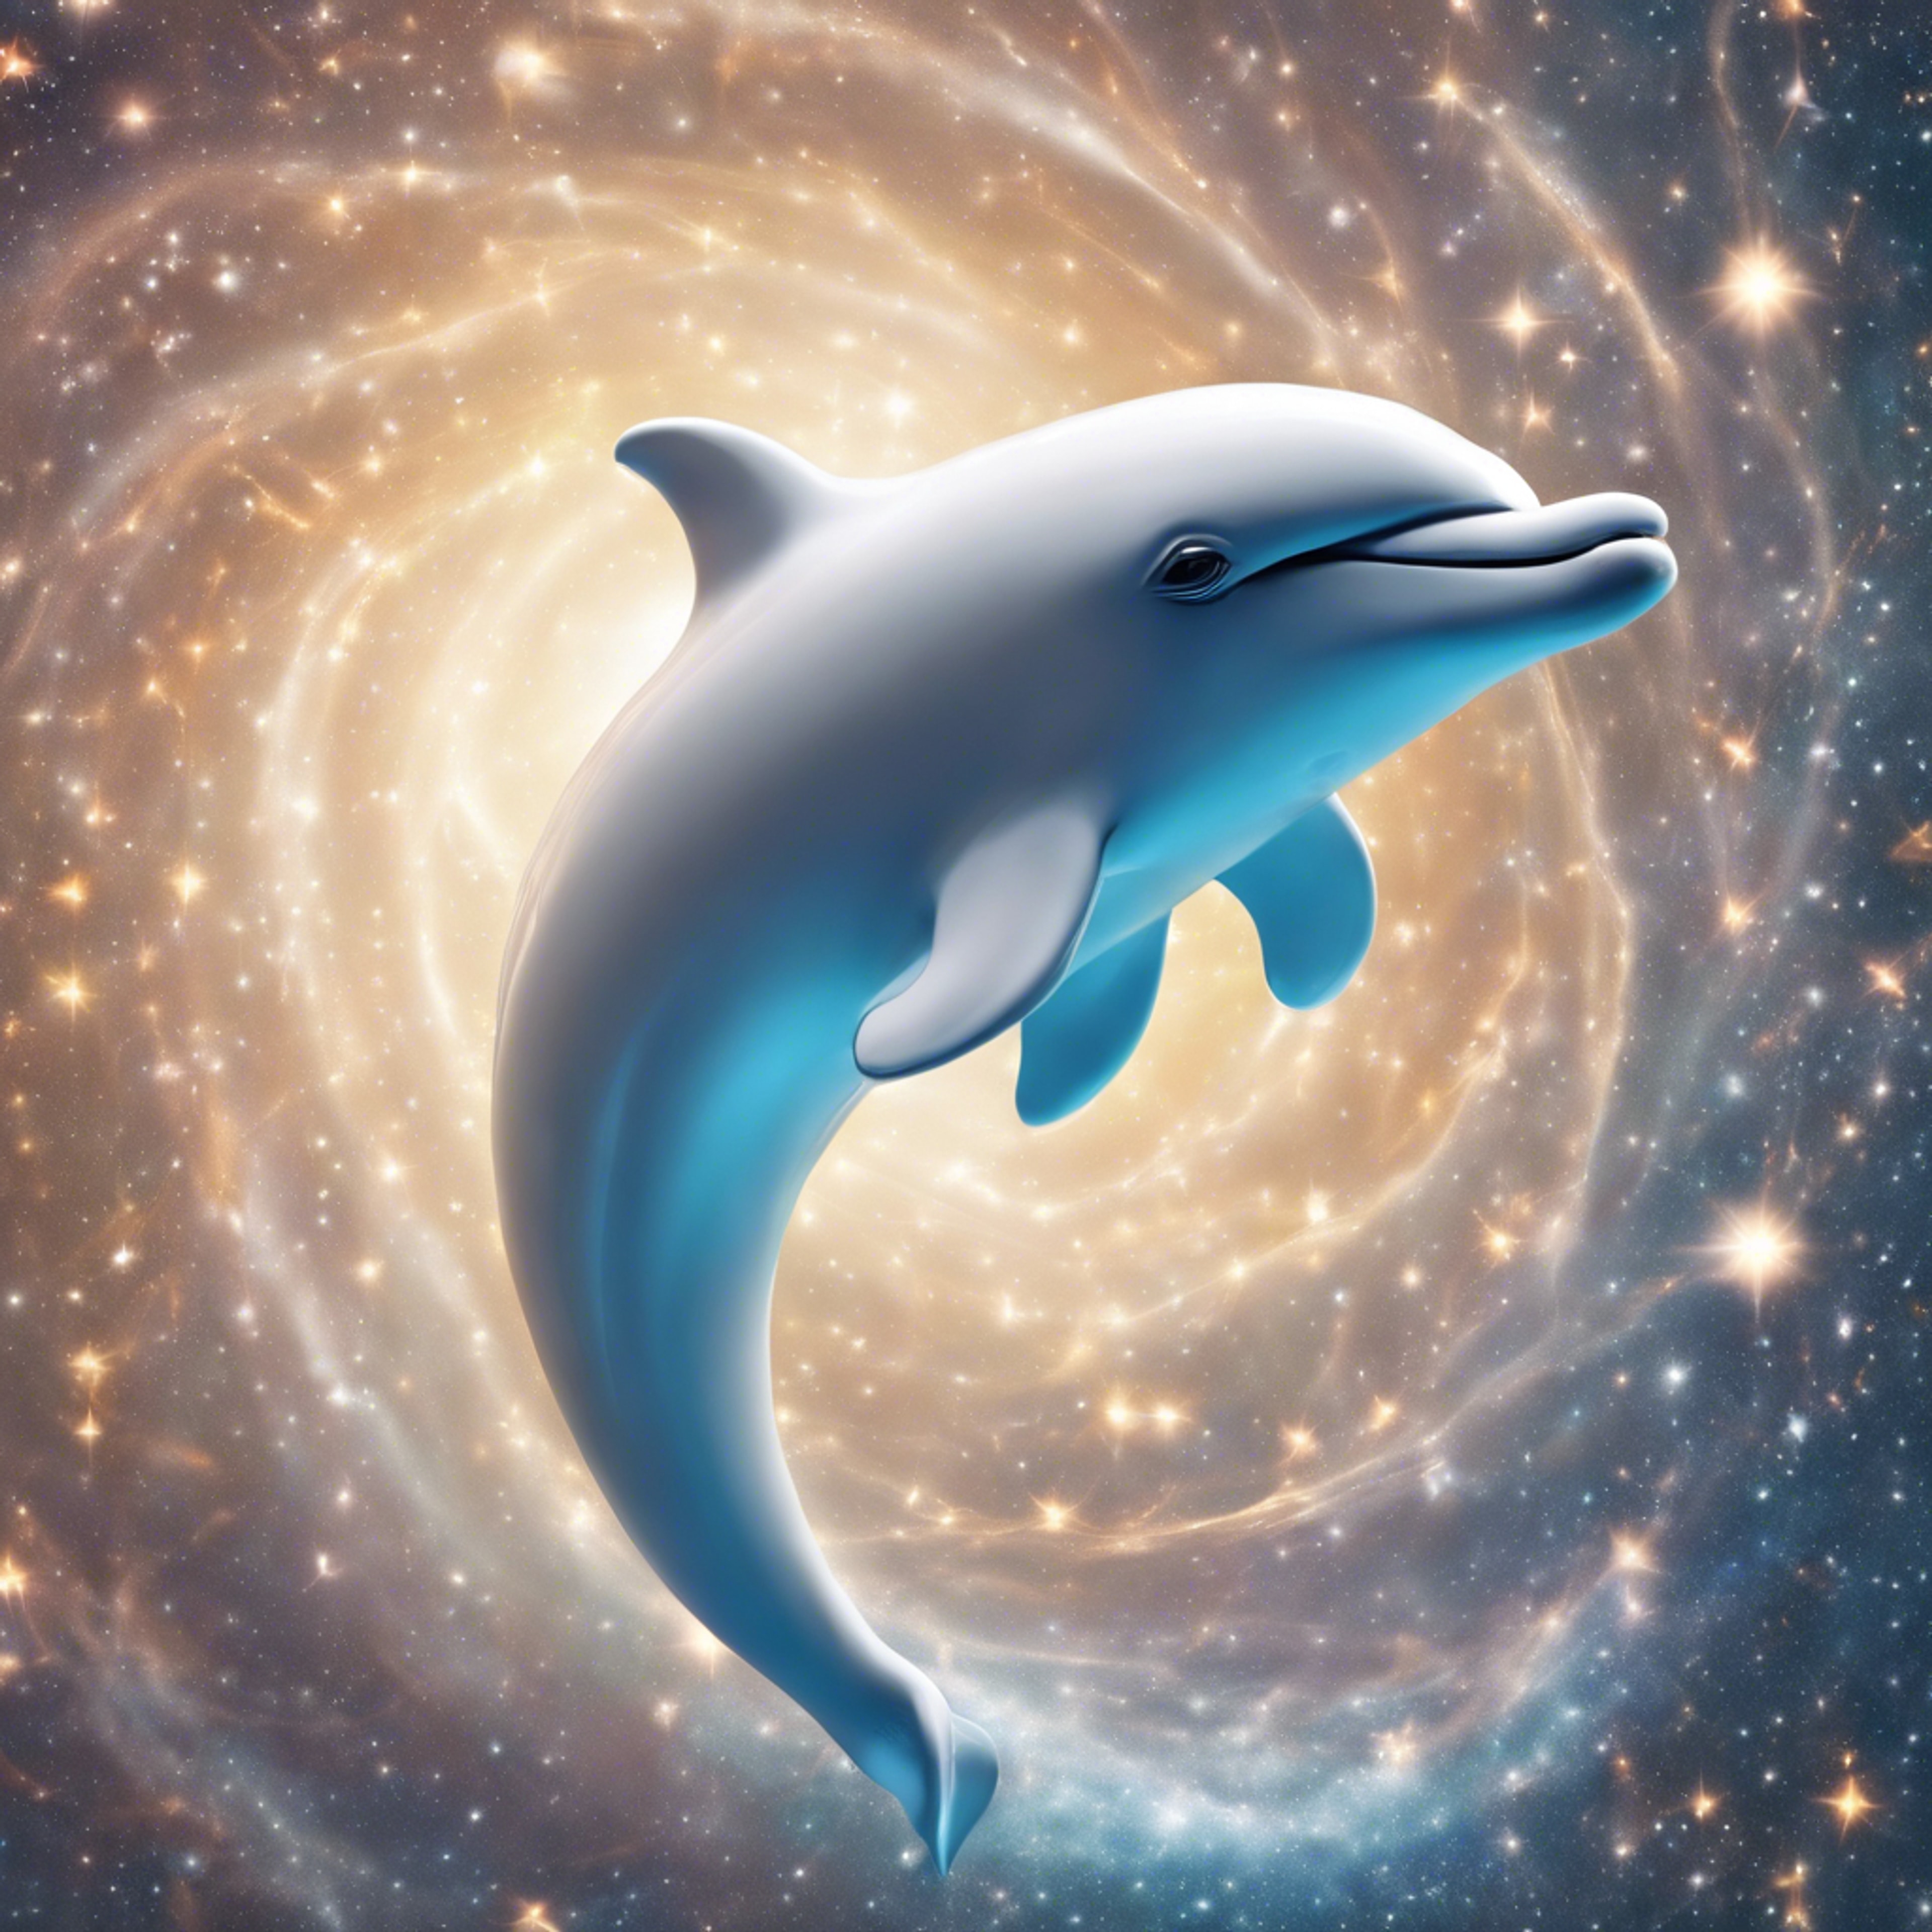 An artist's dreamy portrayal of a porcelain-white dolphin emerging from a swirl of stars in the endless cosmos.壁紙[07abc05d40734834903a]